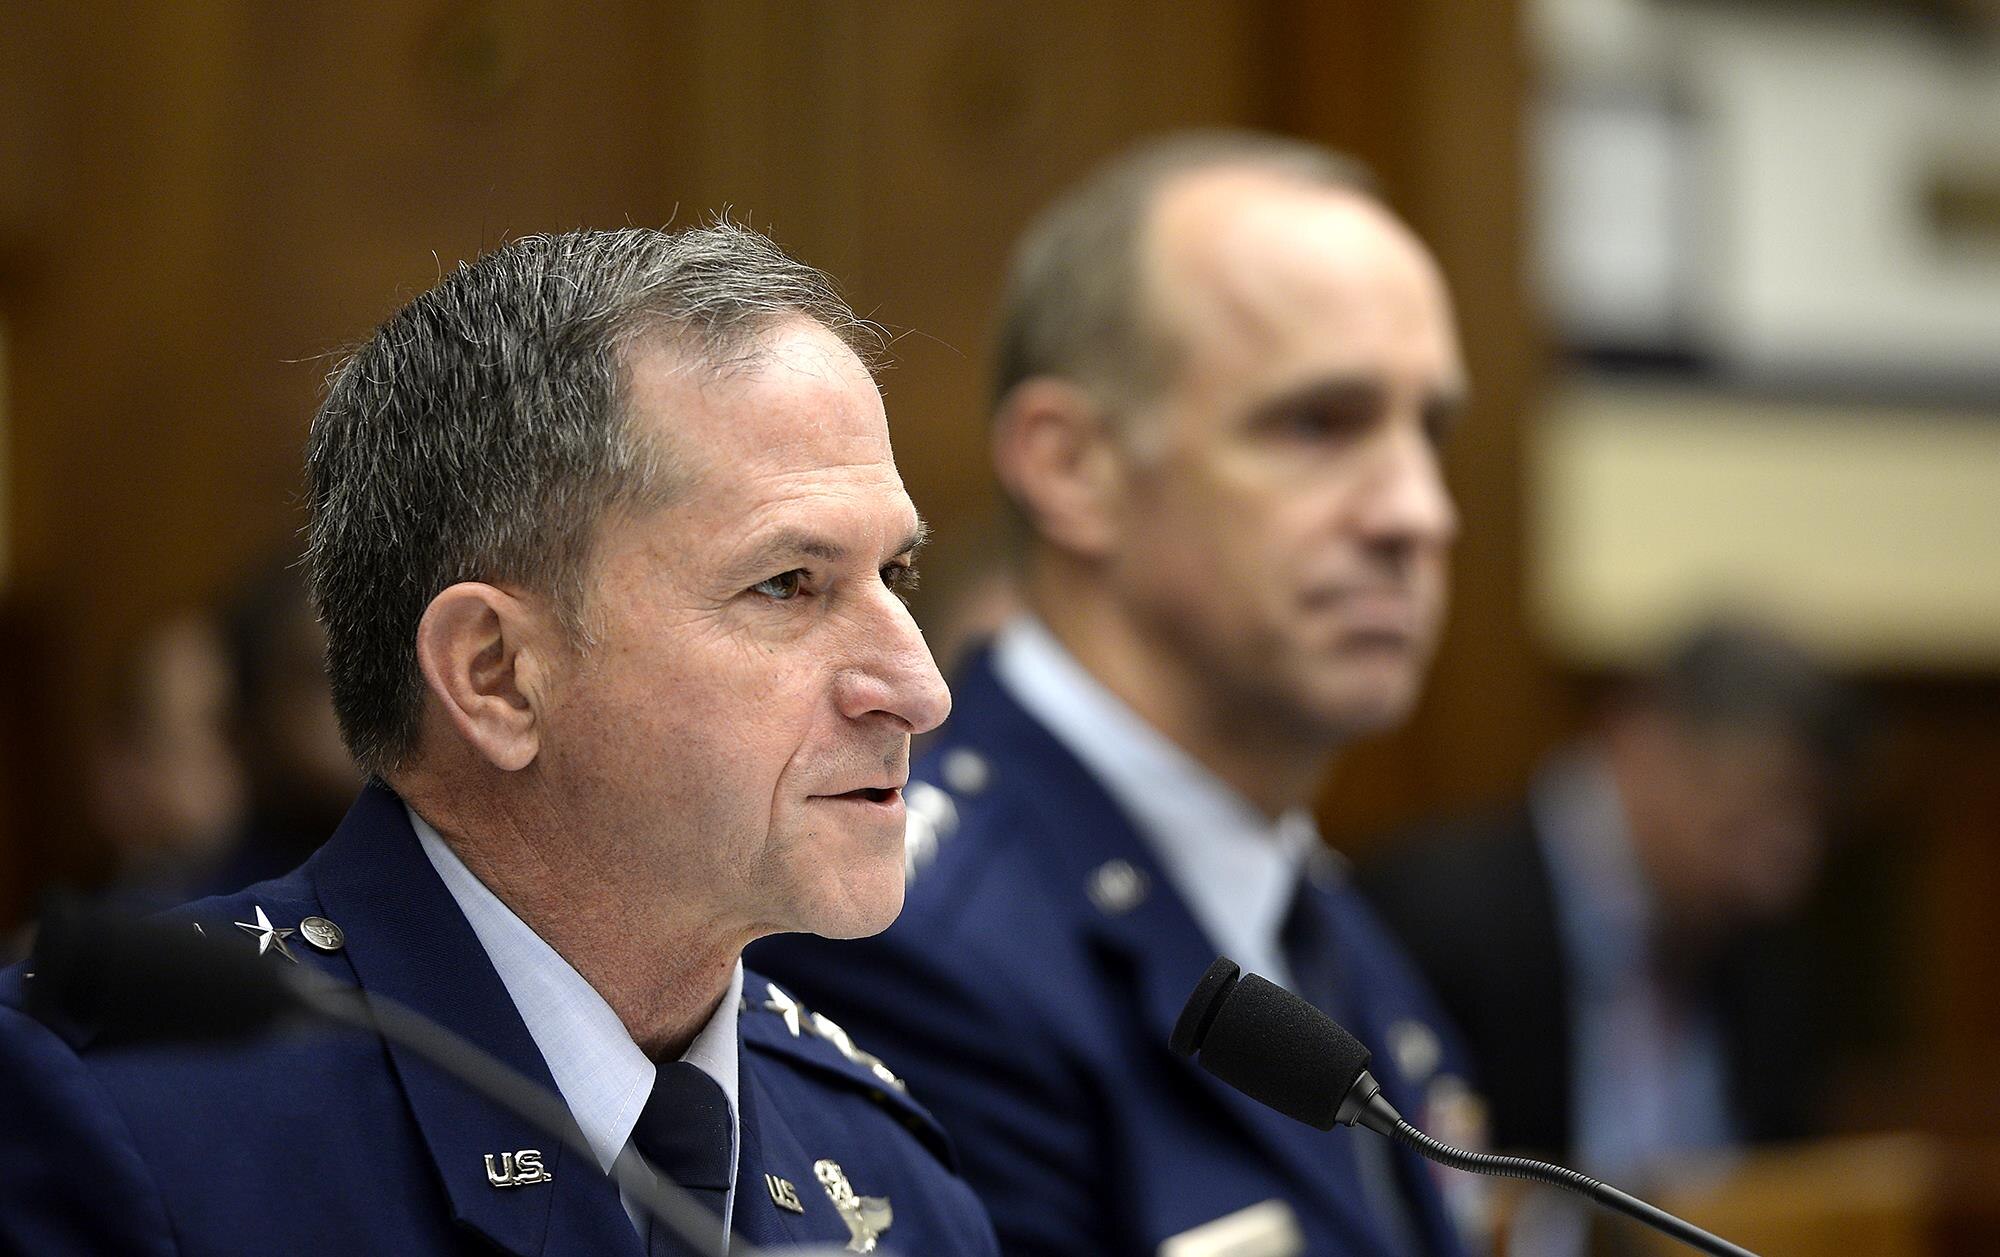 Air Force Vice Chief of Staff Gen. David Goldfein testifies before the House Armed Services Committee on the current readiness of the service in Washington, D.C., Feb. 12, 2016. Testifying with him were Lt. Gen. John Raymond, the Air Force deputy chief of staff for operations, and Lt. Gen. John Cooper, the deputy chief of staff for logistics, engineering and force protection. (U.S. Air Force photo/Scott M. Ash)
